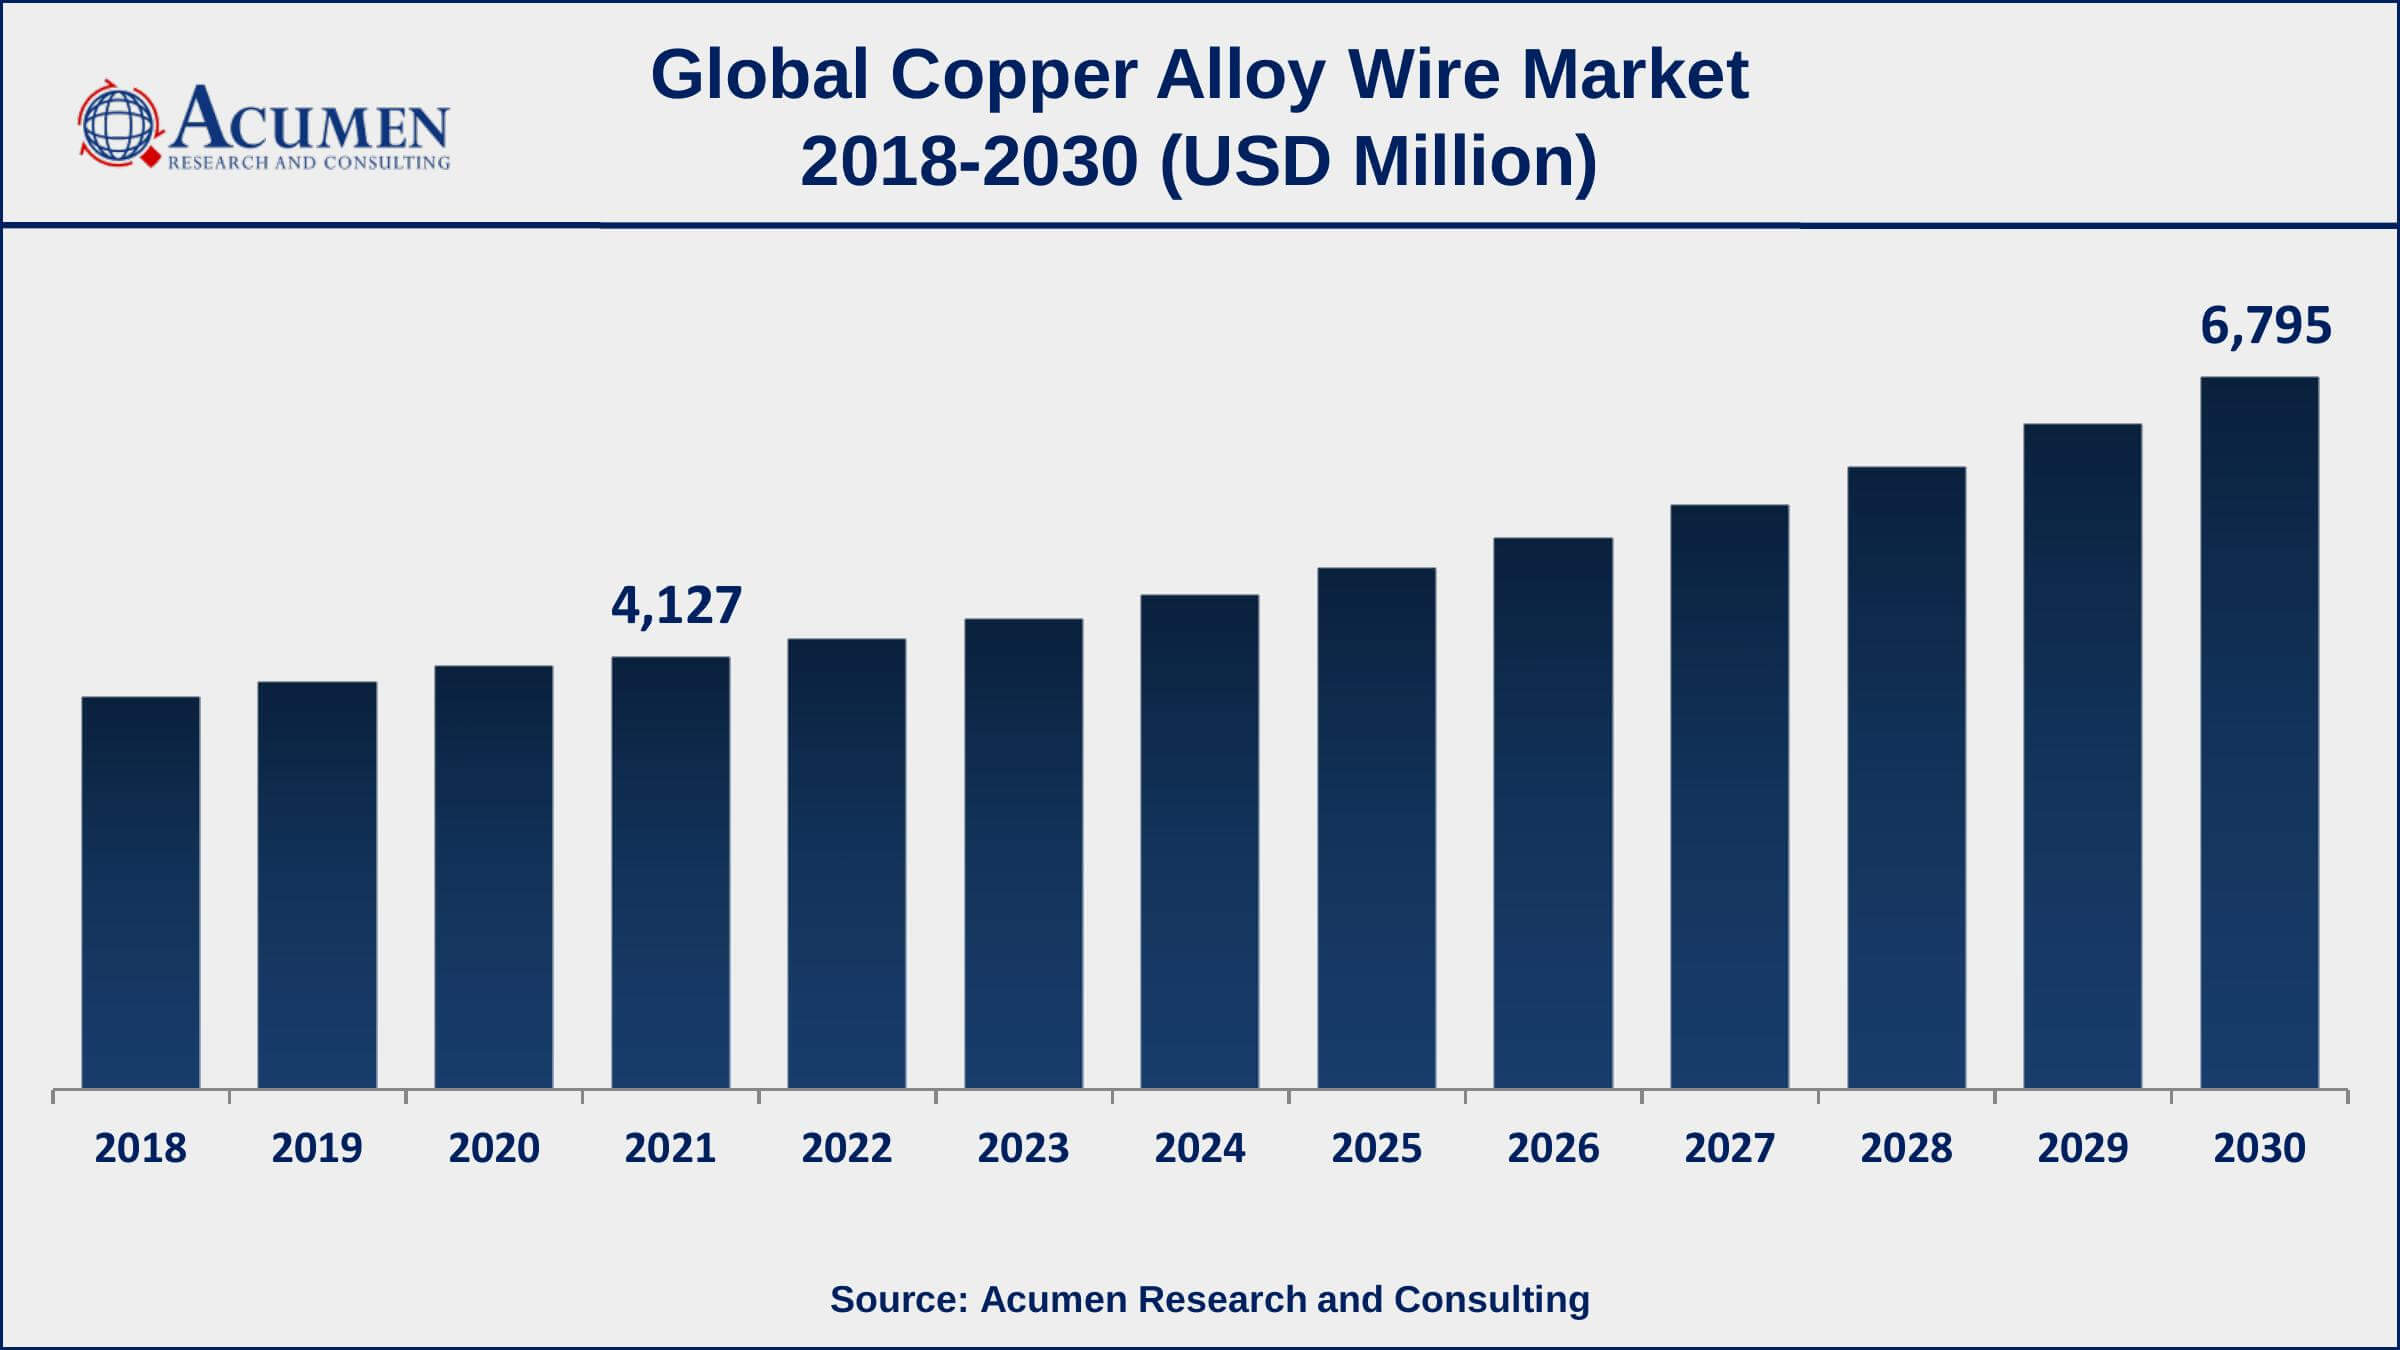 Asia-Pacific copper alloy wire market share accounted for over 60% of total market shares in 2021